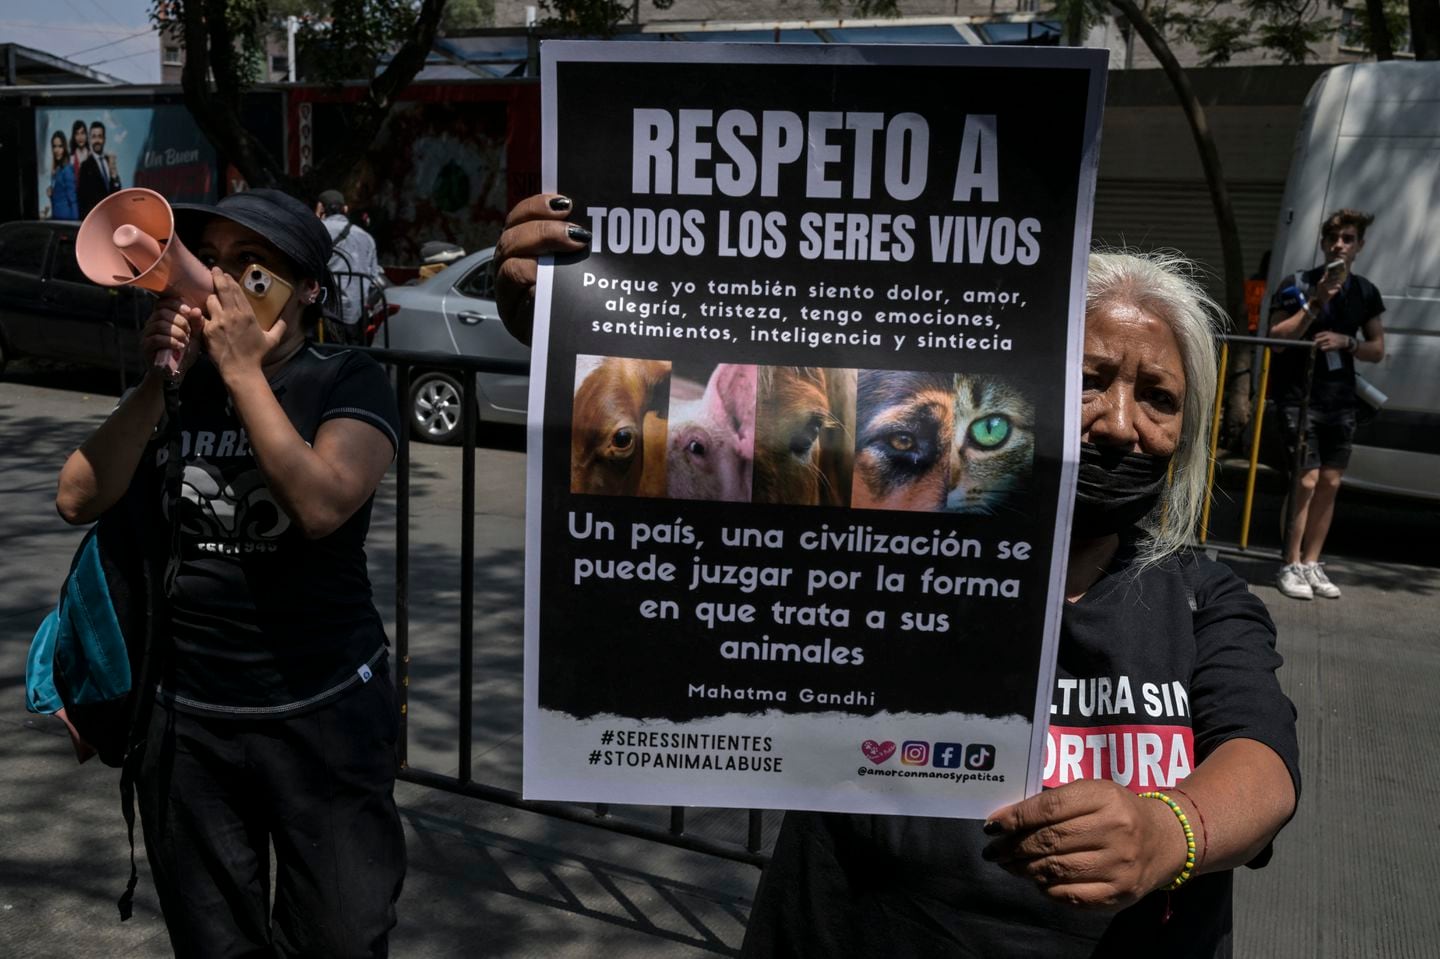 In April, activists in Mexico City demanded the passage of a law that grants equal rights to animals.